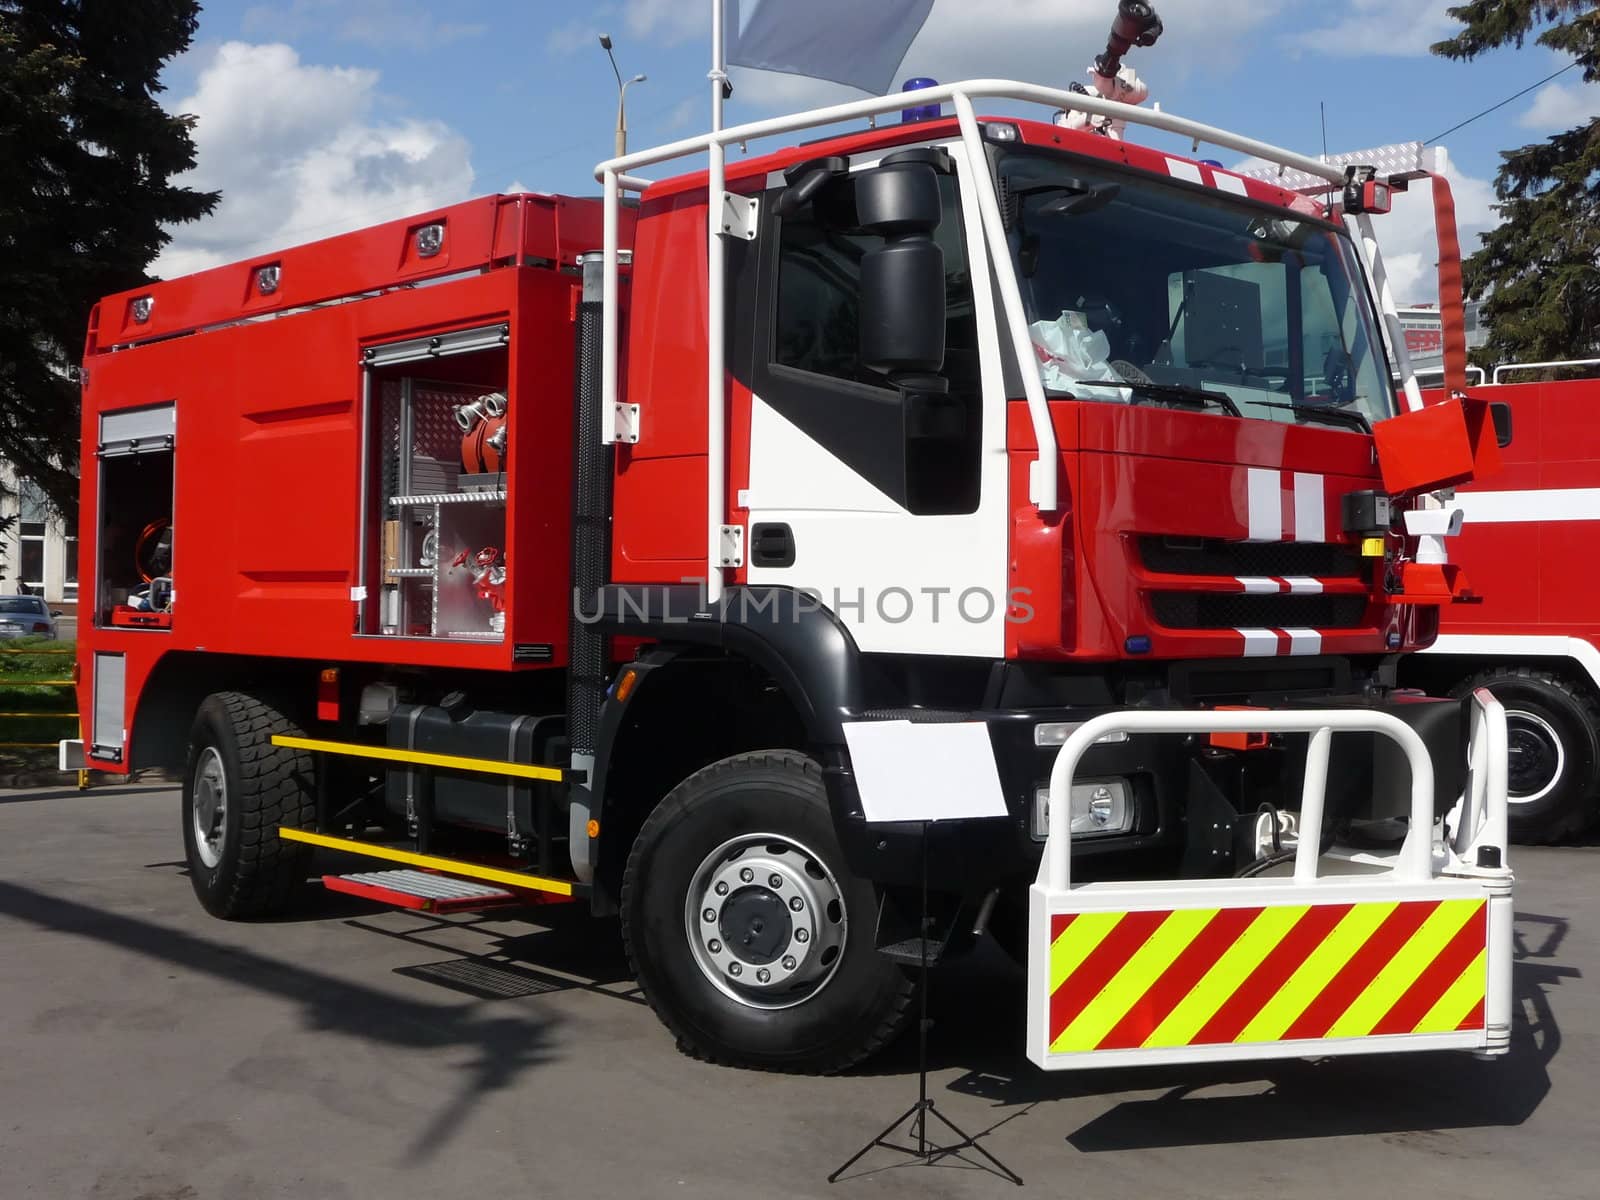 Powerful fire truck by tomatto